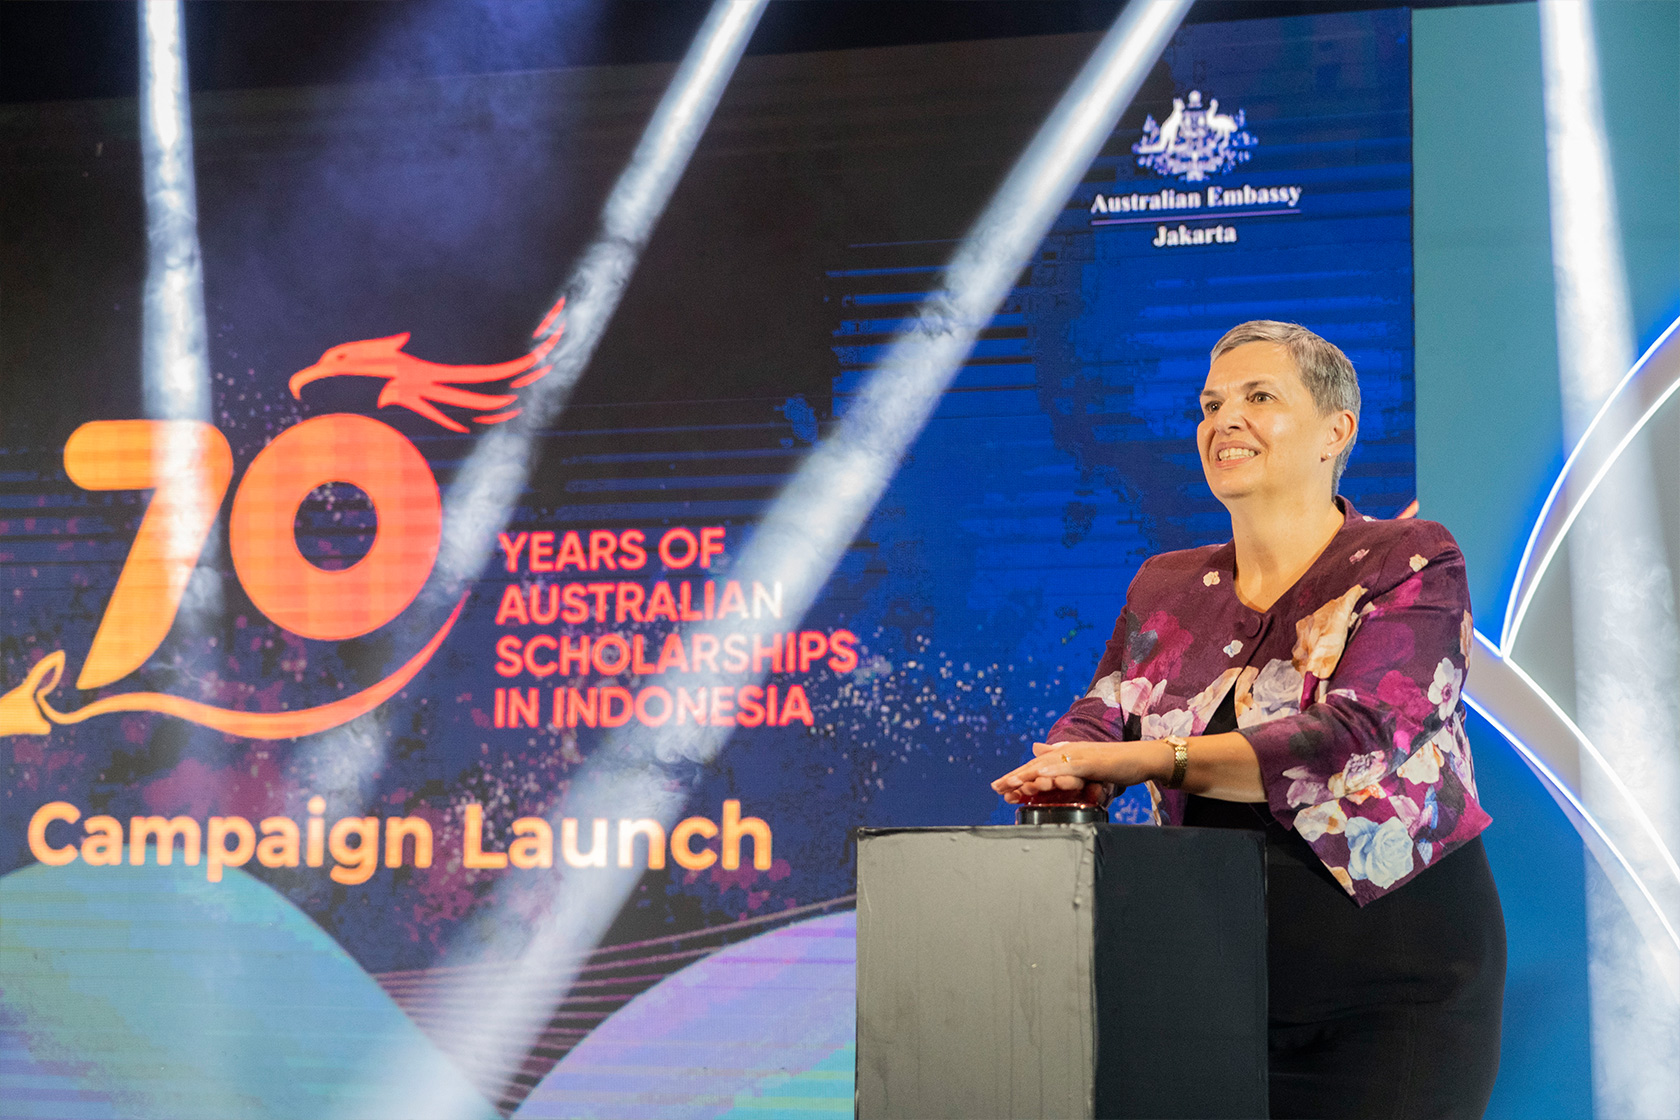 The Australian Ambassador to Indonesia officially launched the 70 Years of Australian Scholarships in Indonesia campaign.